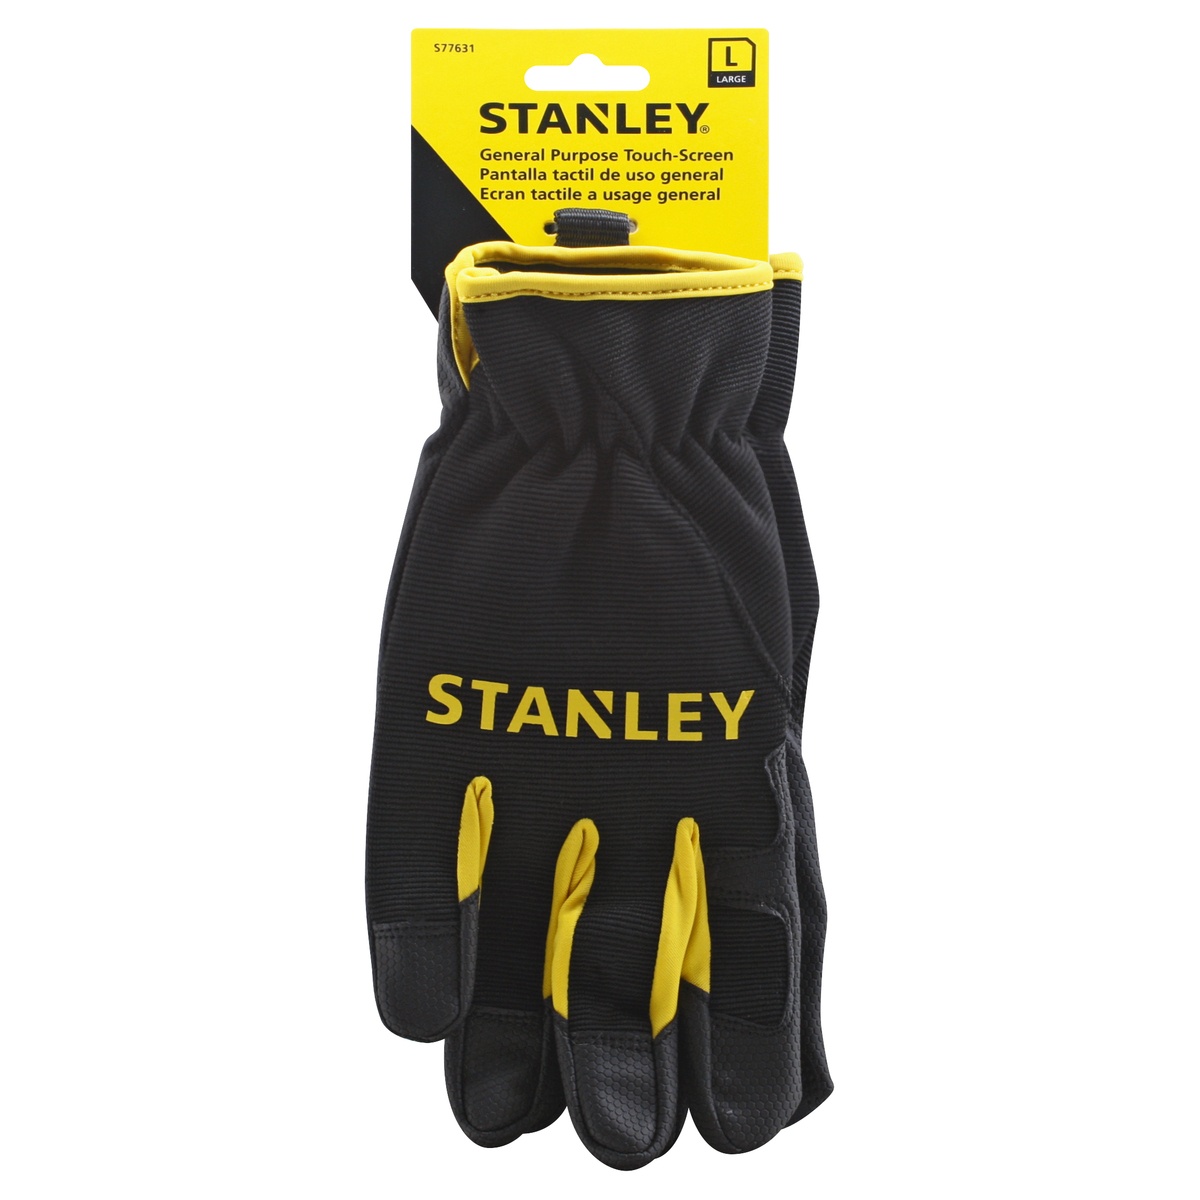 slide 1 of 1, STANLEY Gloves General Purpose Touch Screen Large - Each, 1 ct